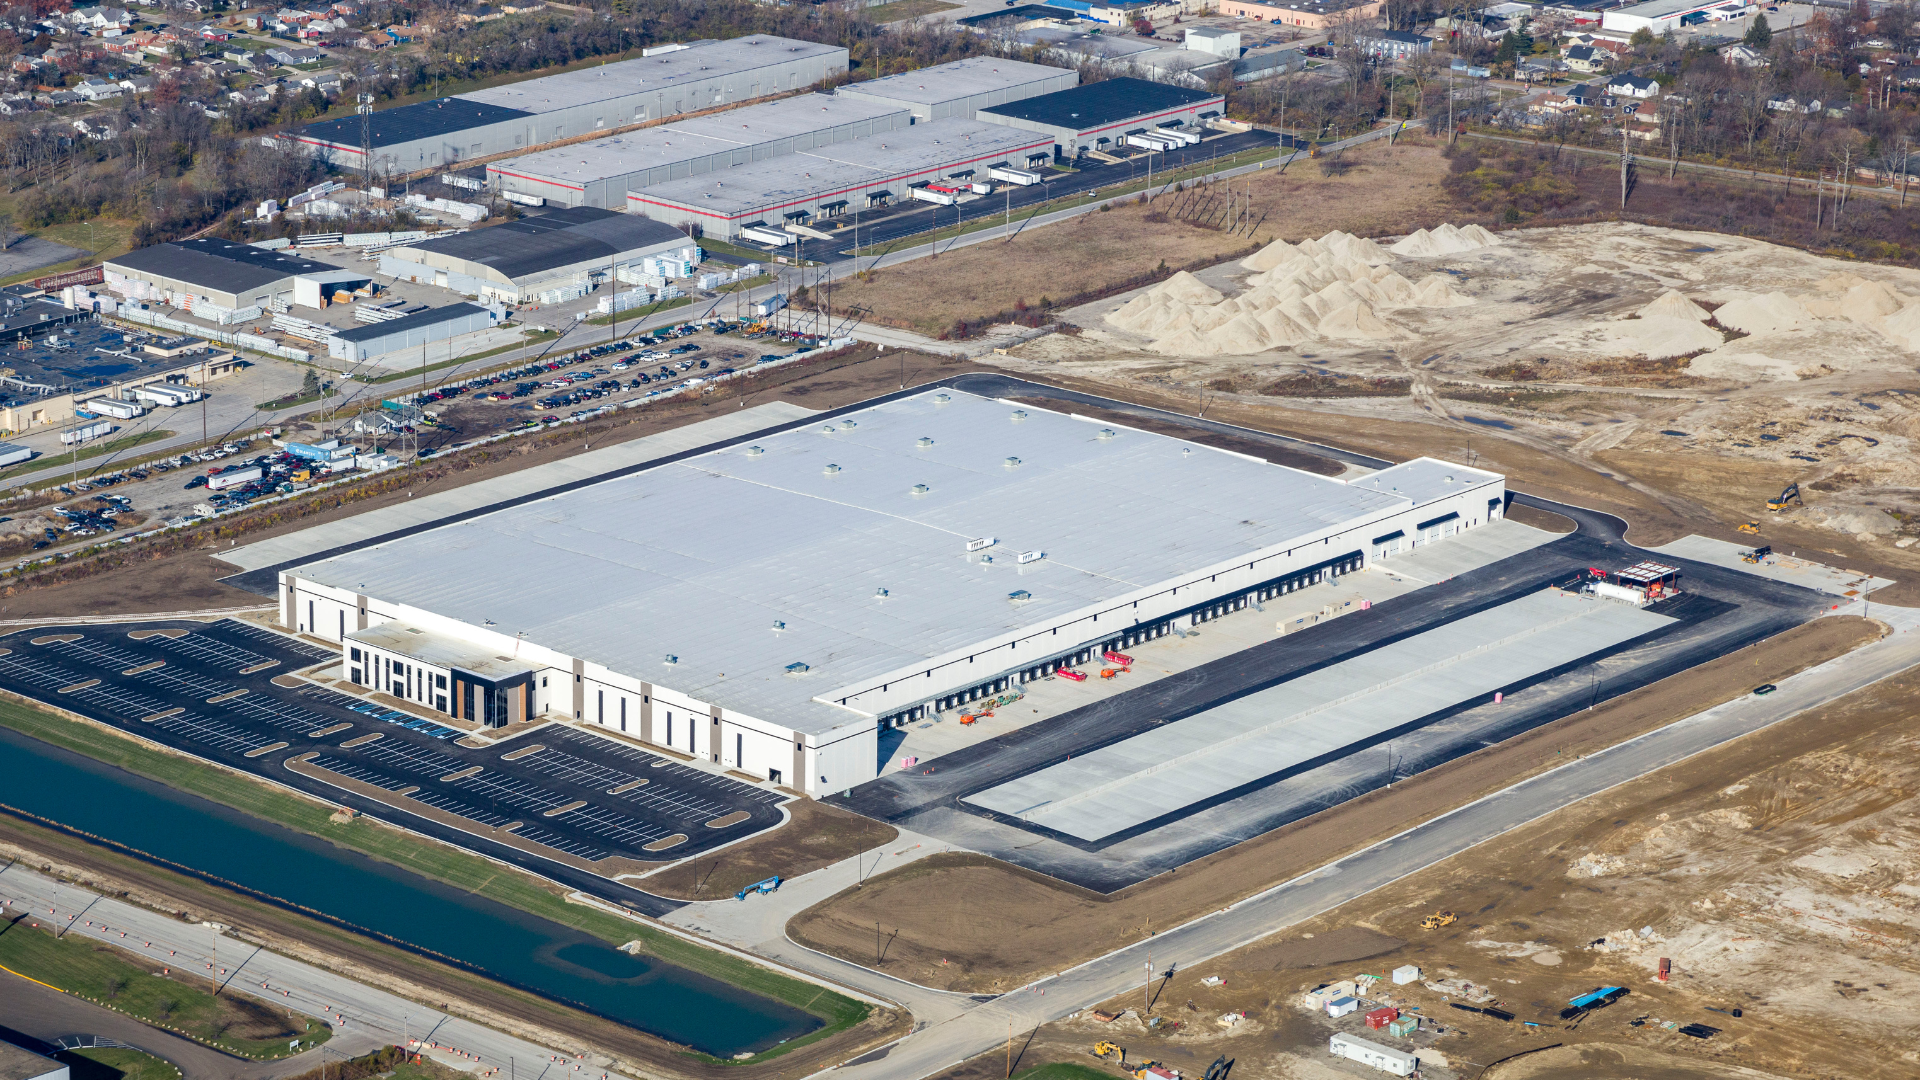 Aerial image of a warehouse and parking lot